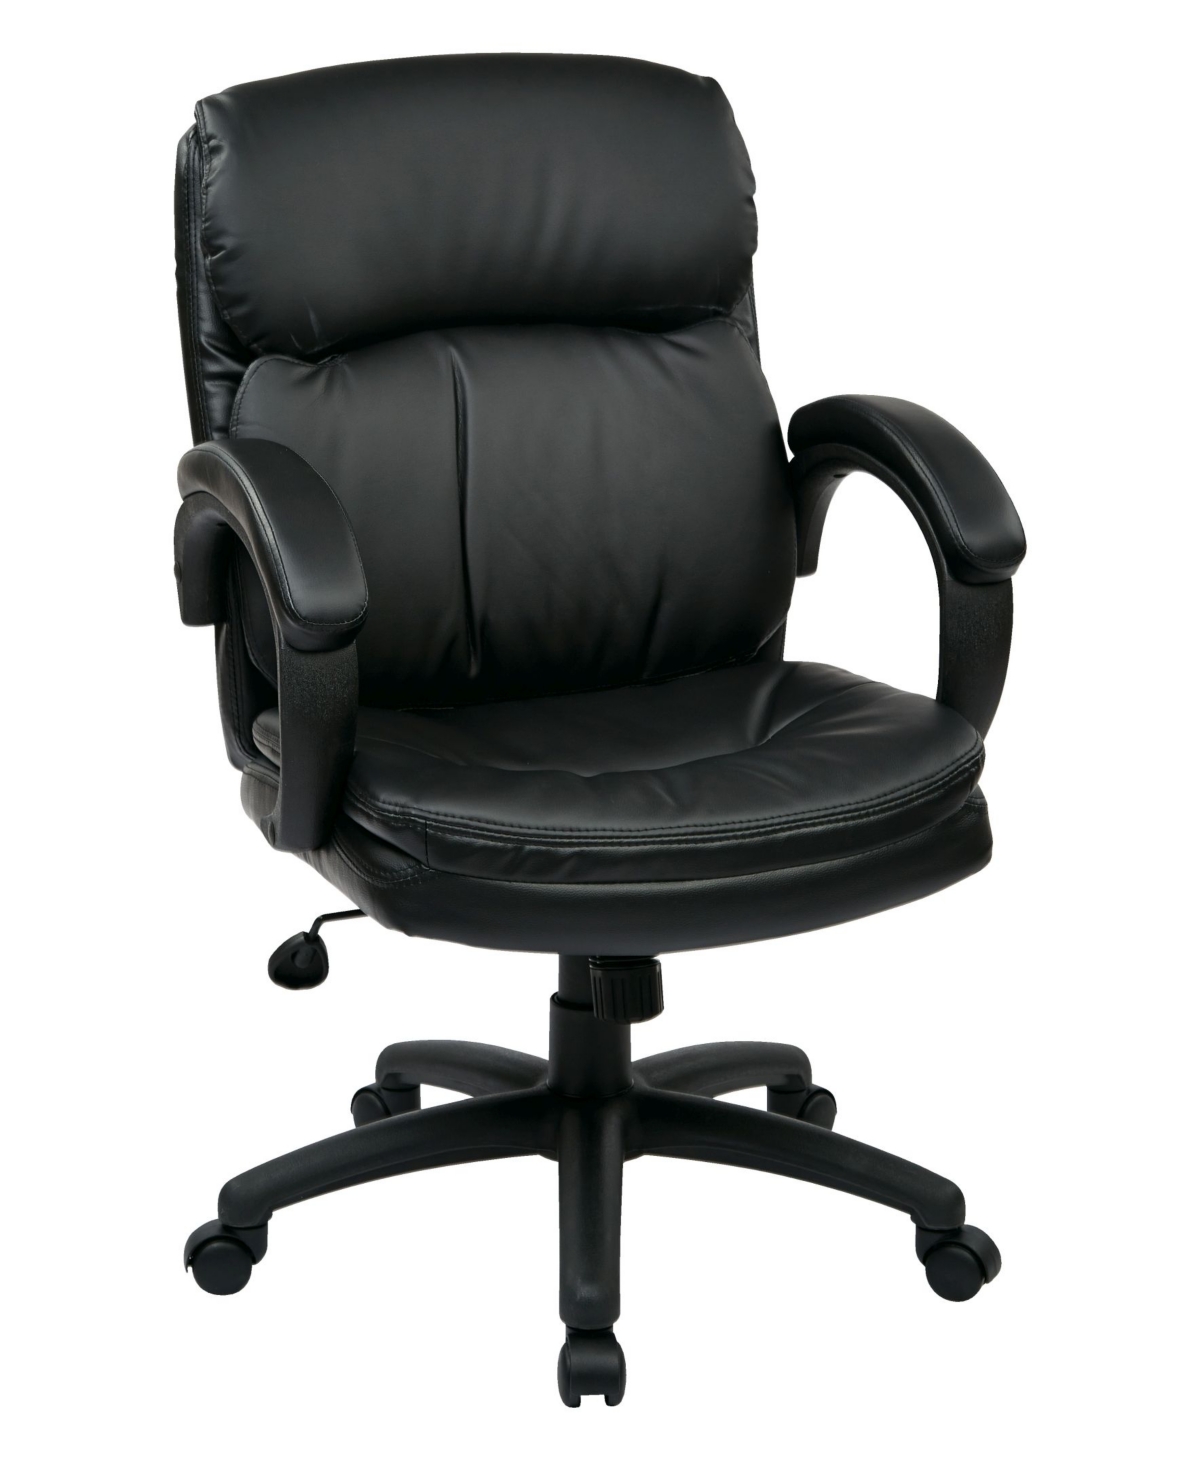 Osp Home Furnishings Bonded Leather Executive Office Chair